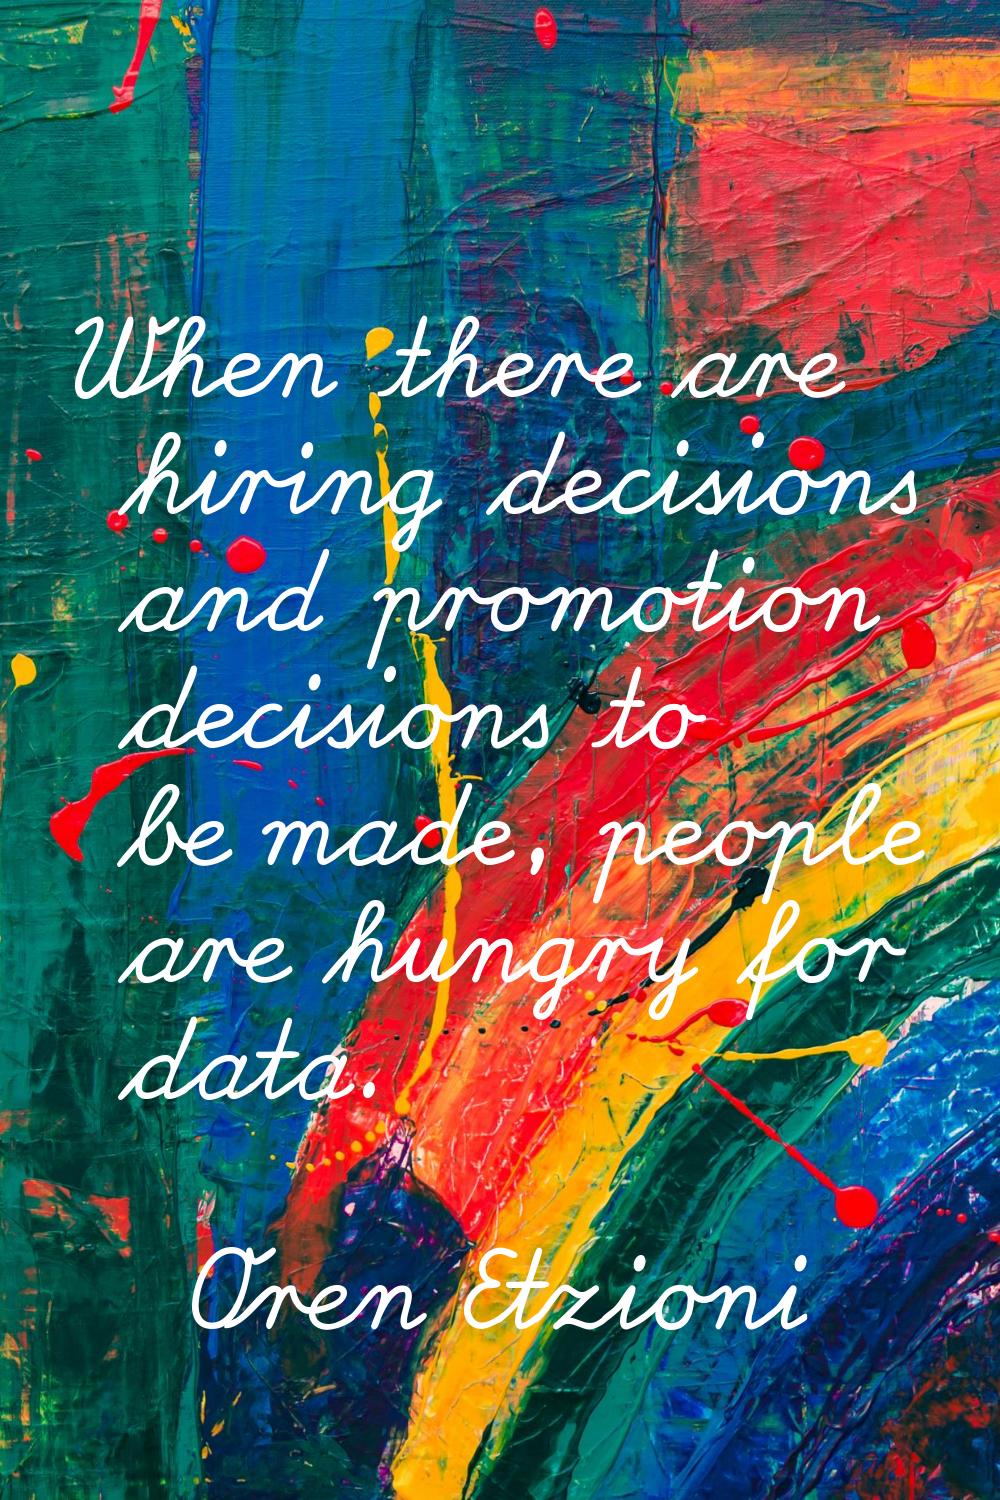 When there are hiring decisions and promotion decisions to be made, people are hungry for data.